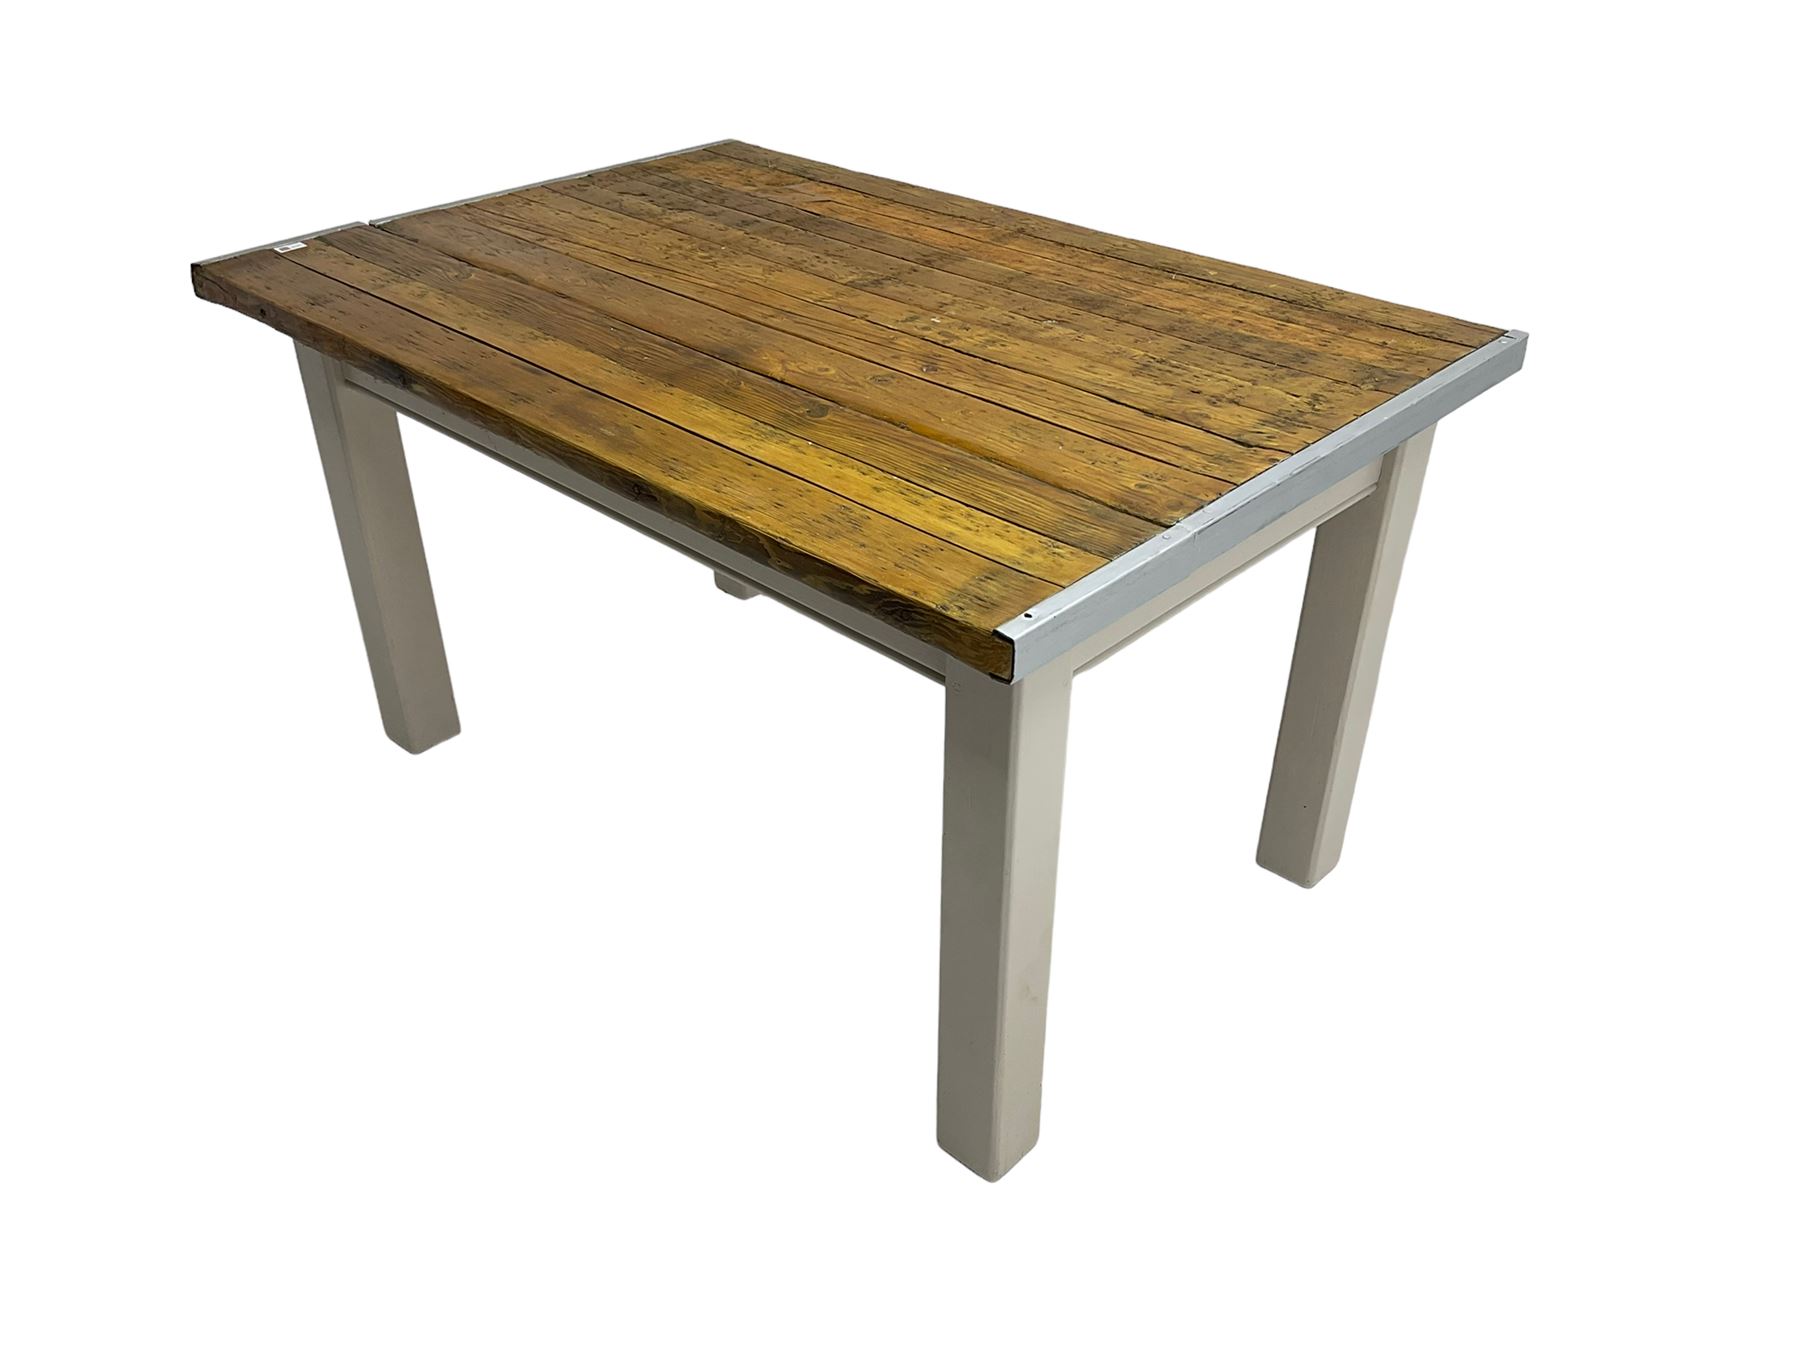 Rustic pine dining table - Image 6 of 6